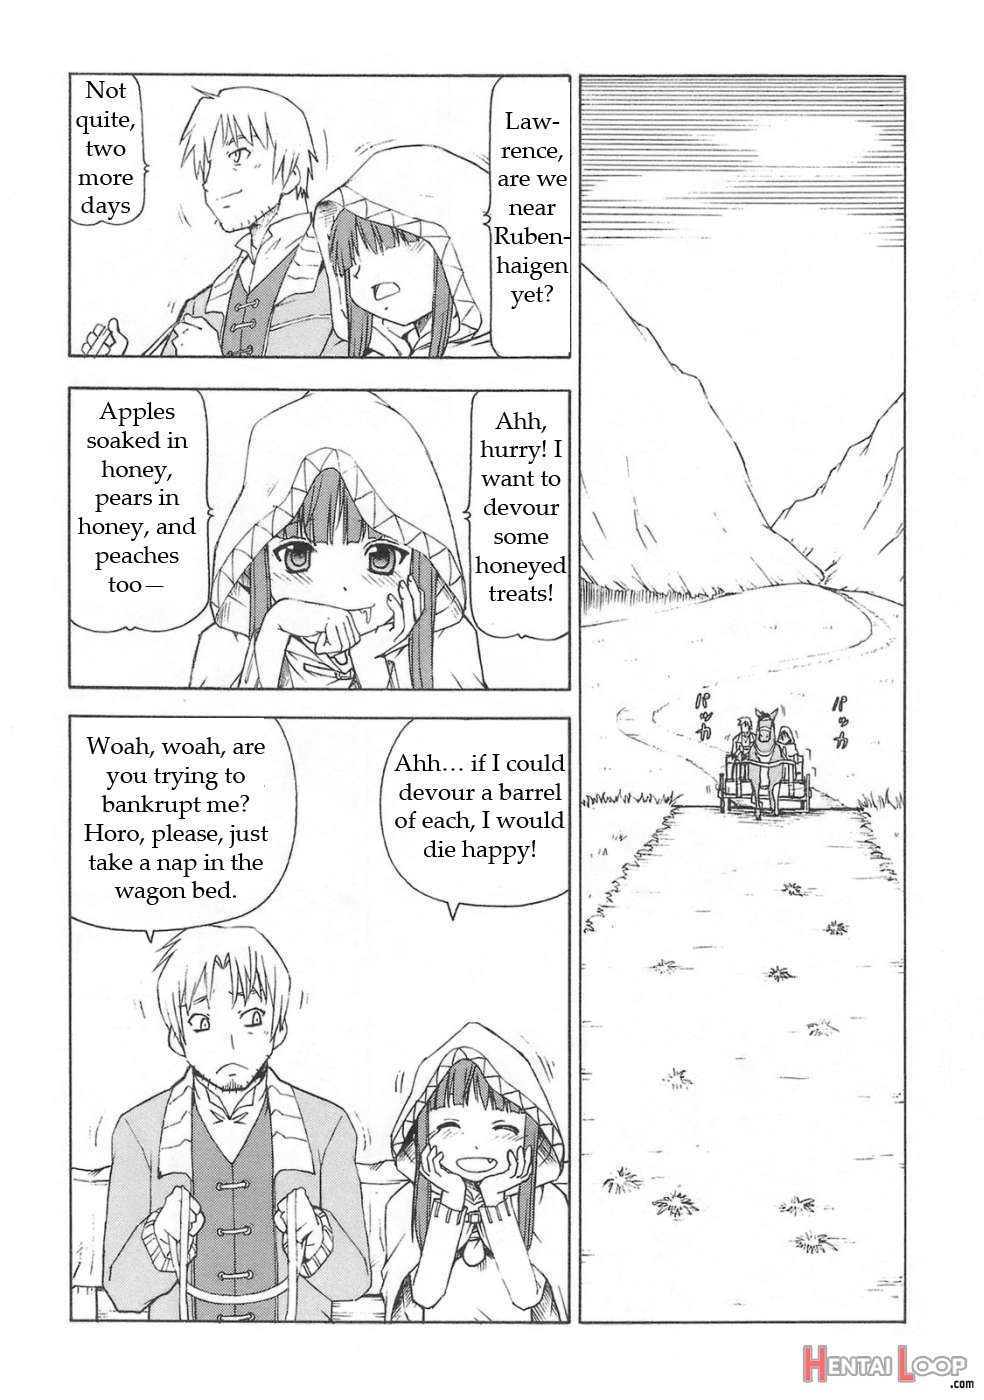 Ookami To Butter Inu page 9